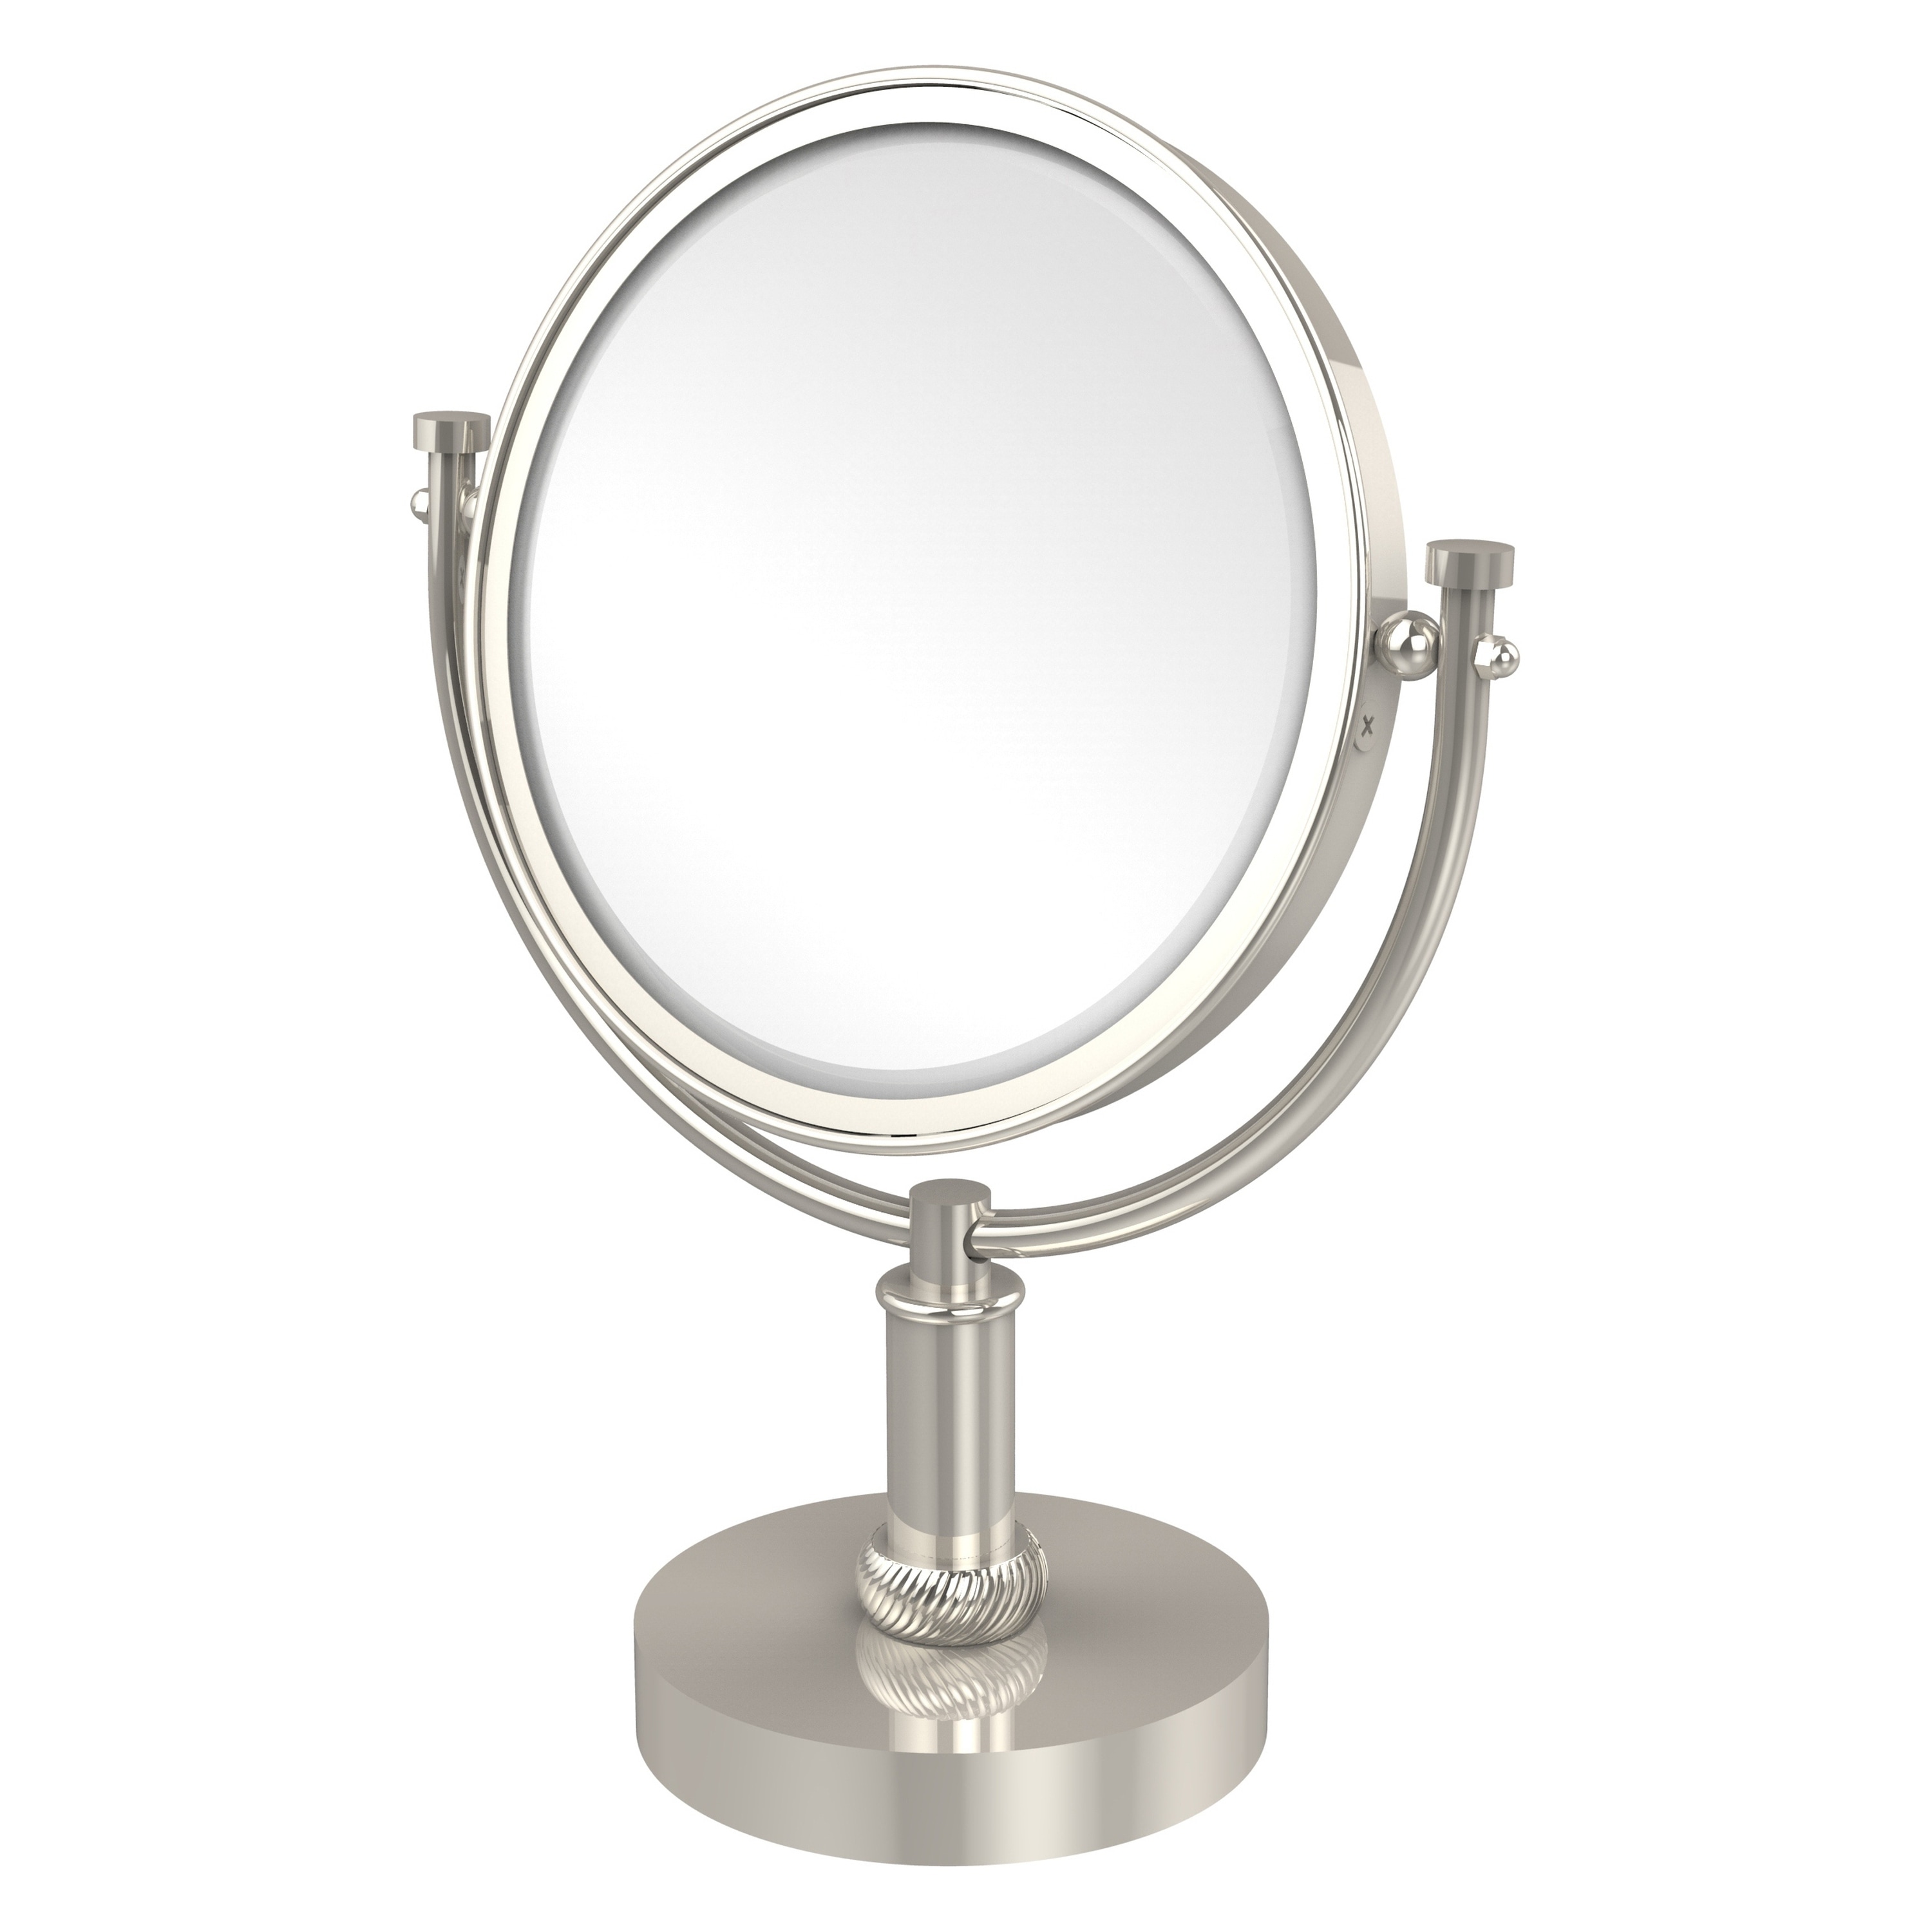 8-in x 15-in Polished Gold Double-sided 3X Magnifying Countertop Vanity Mirror | - Allied Brass DM-4T/3X-PNI